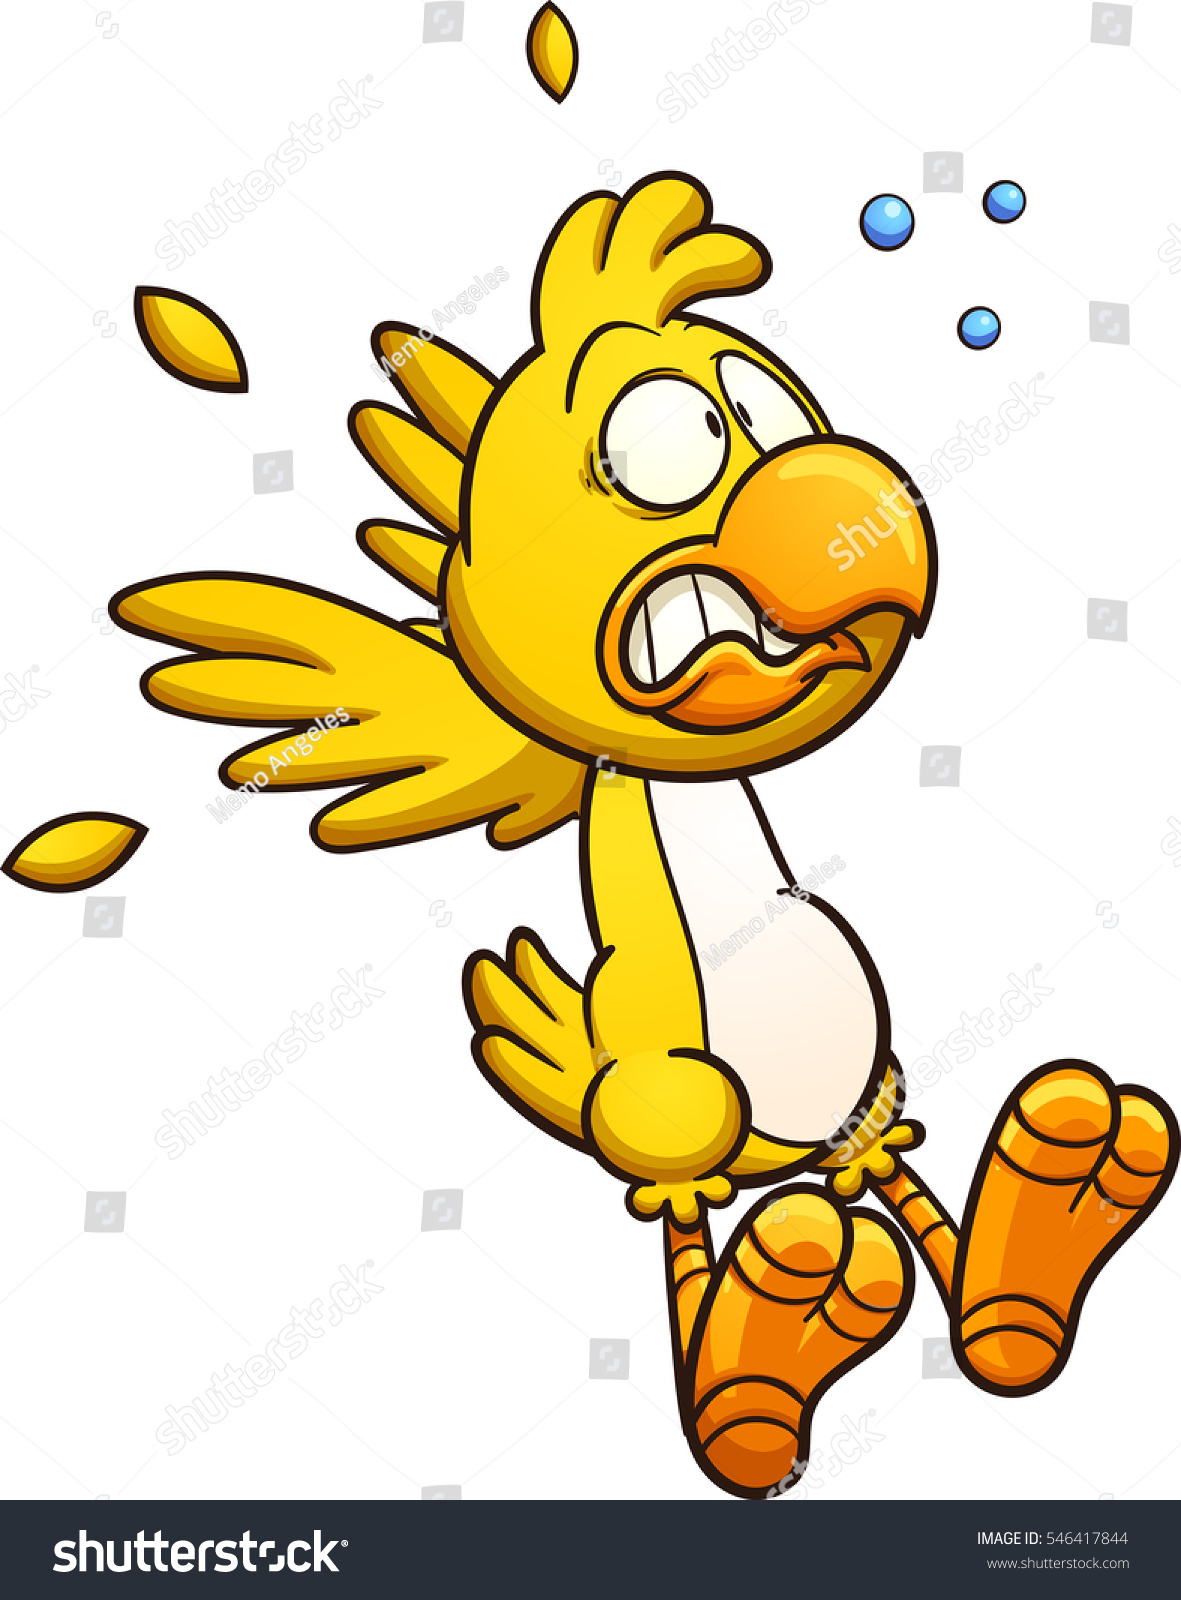 scared chicken clipart free - photo #18